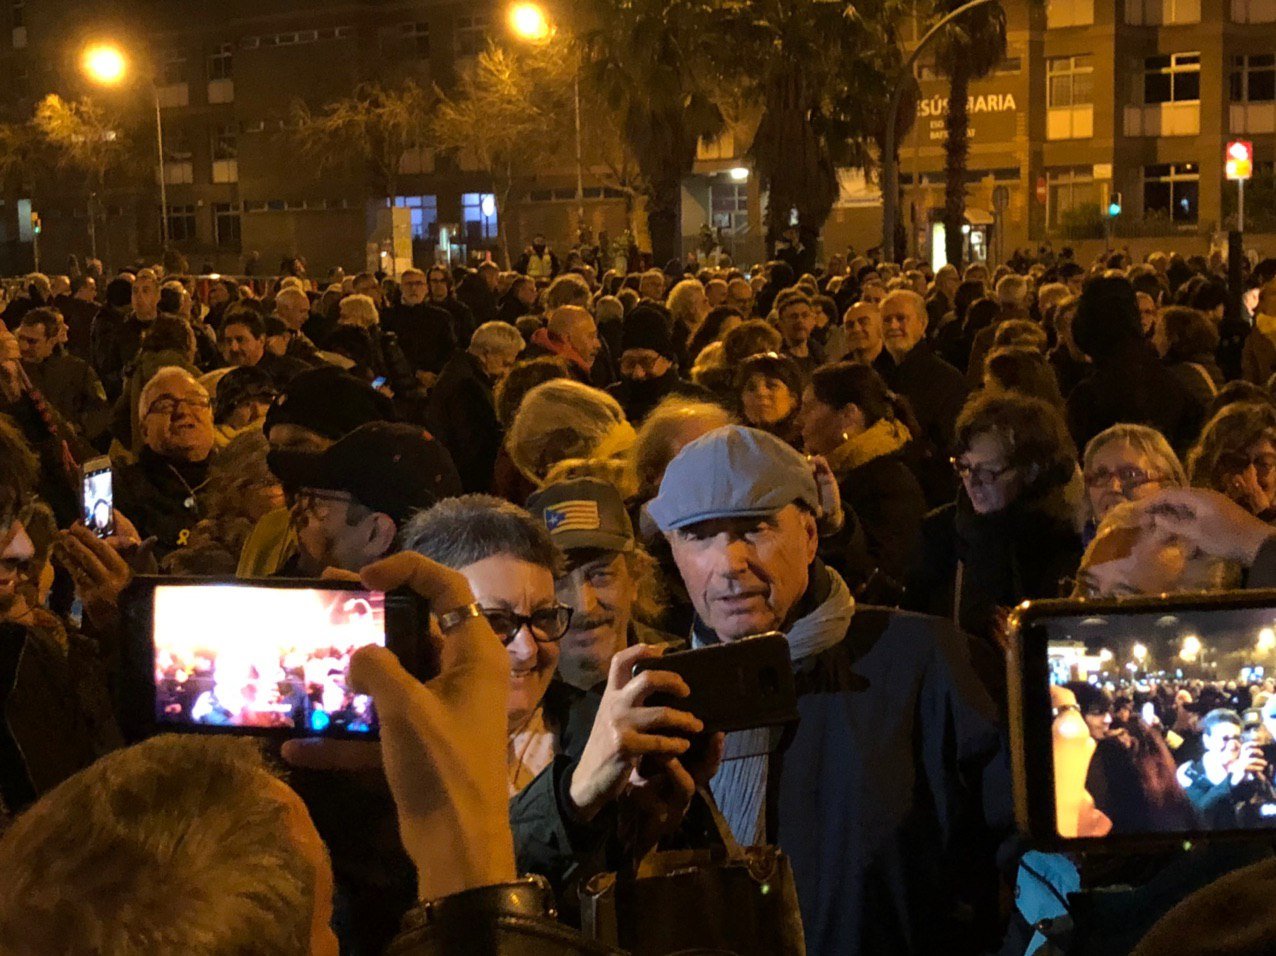 Barcelona's Meridiana protests, 130th night in a row: "The candle is still burning"